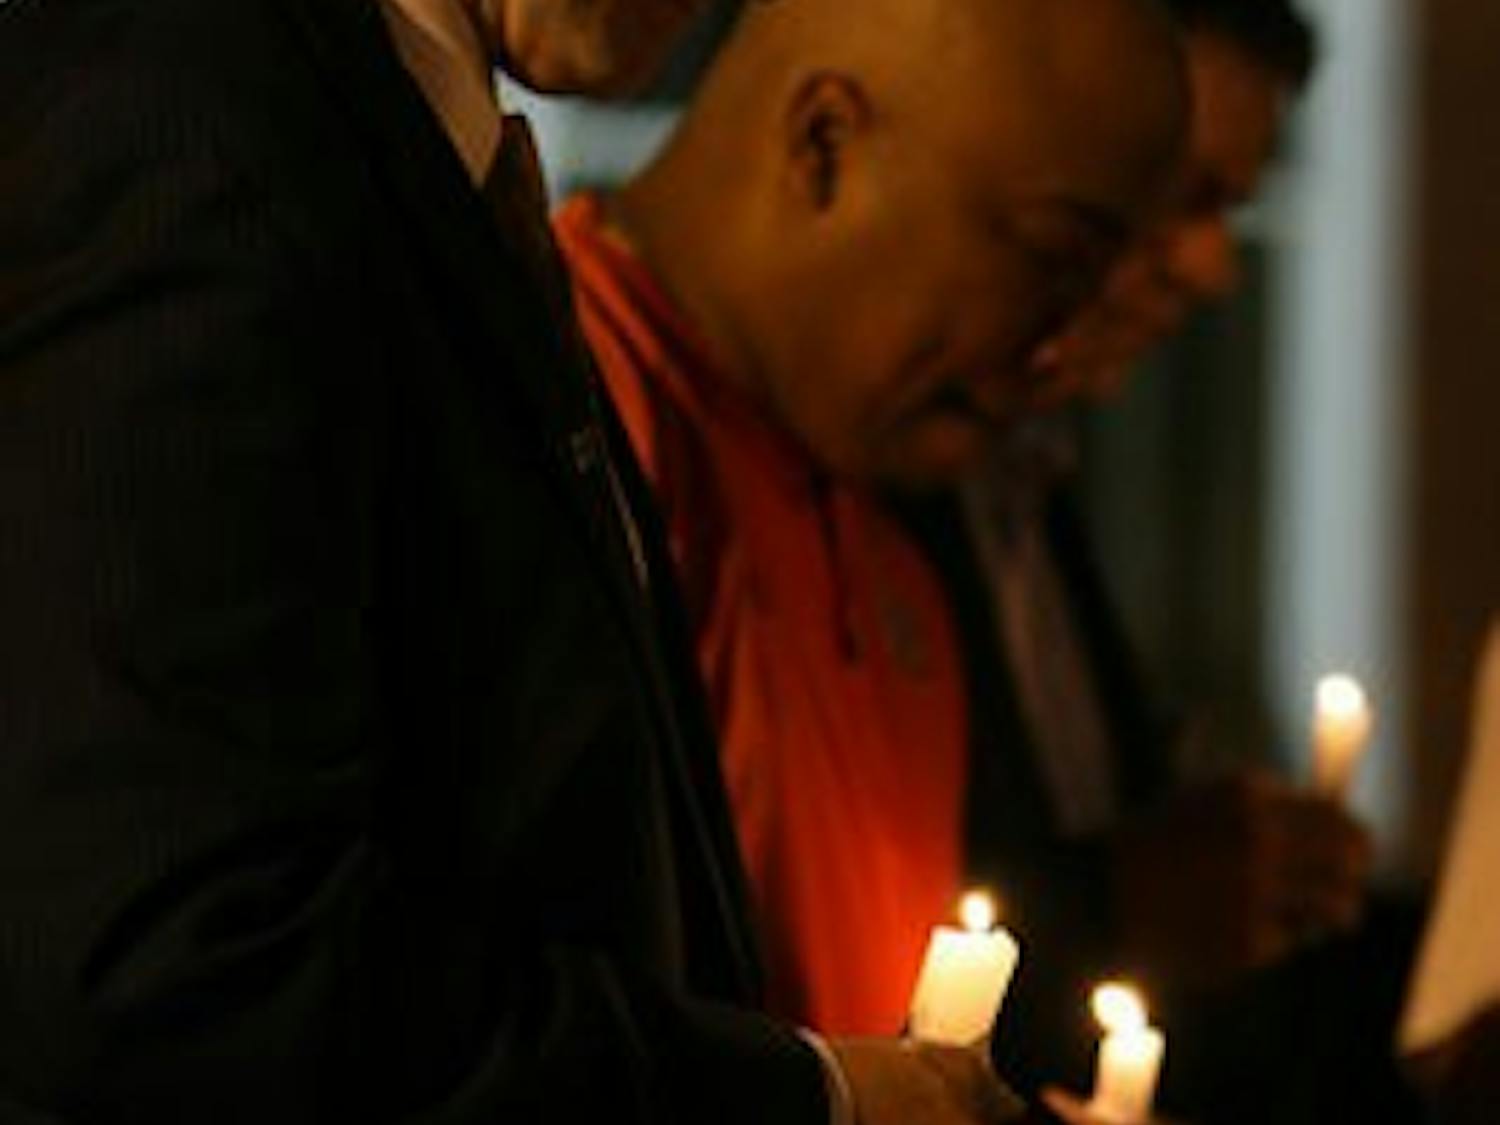 Gene Chizik, left, and Trooper Taylor bow their heads in a moment of silence for former football players Ladarious Phillips and Ed Christian at a candlelight vigil in their honor Thursday night. (Courtesy of Rebecca Croomes)